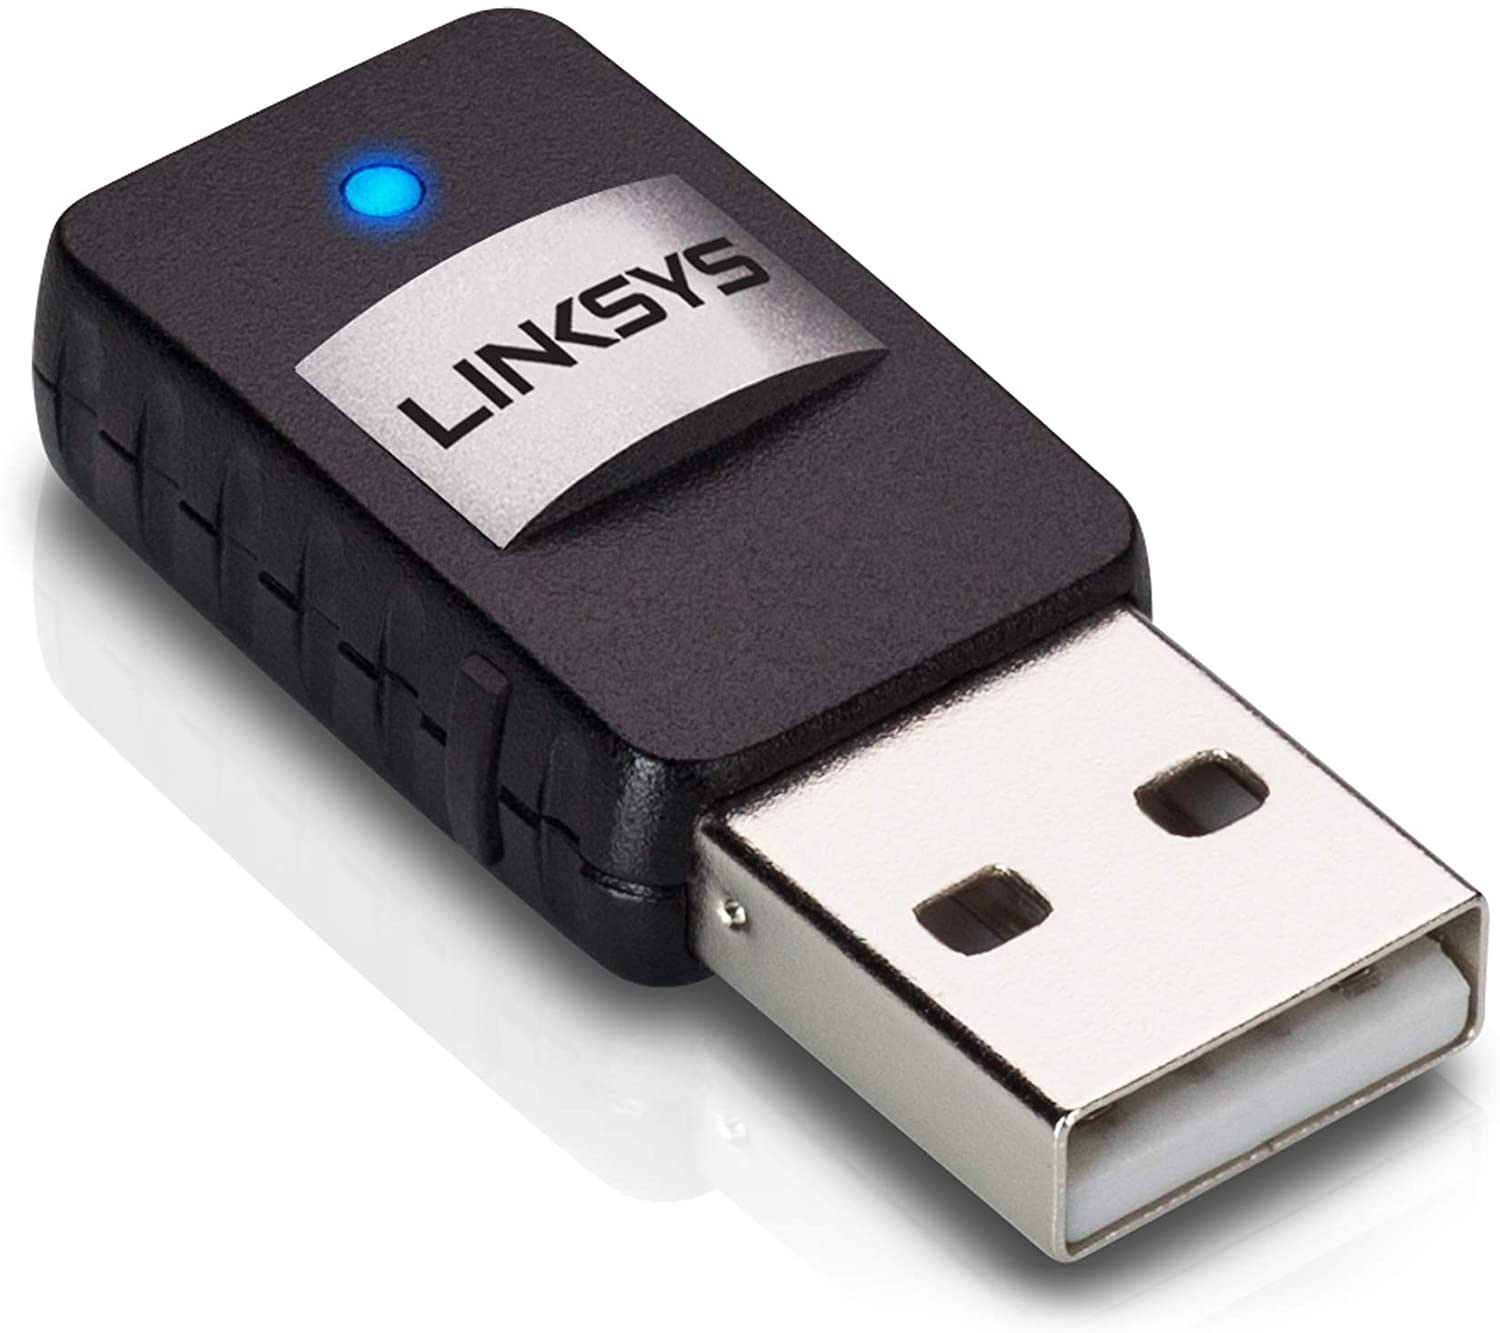 linksys wusb100 driver for mac